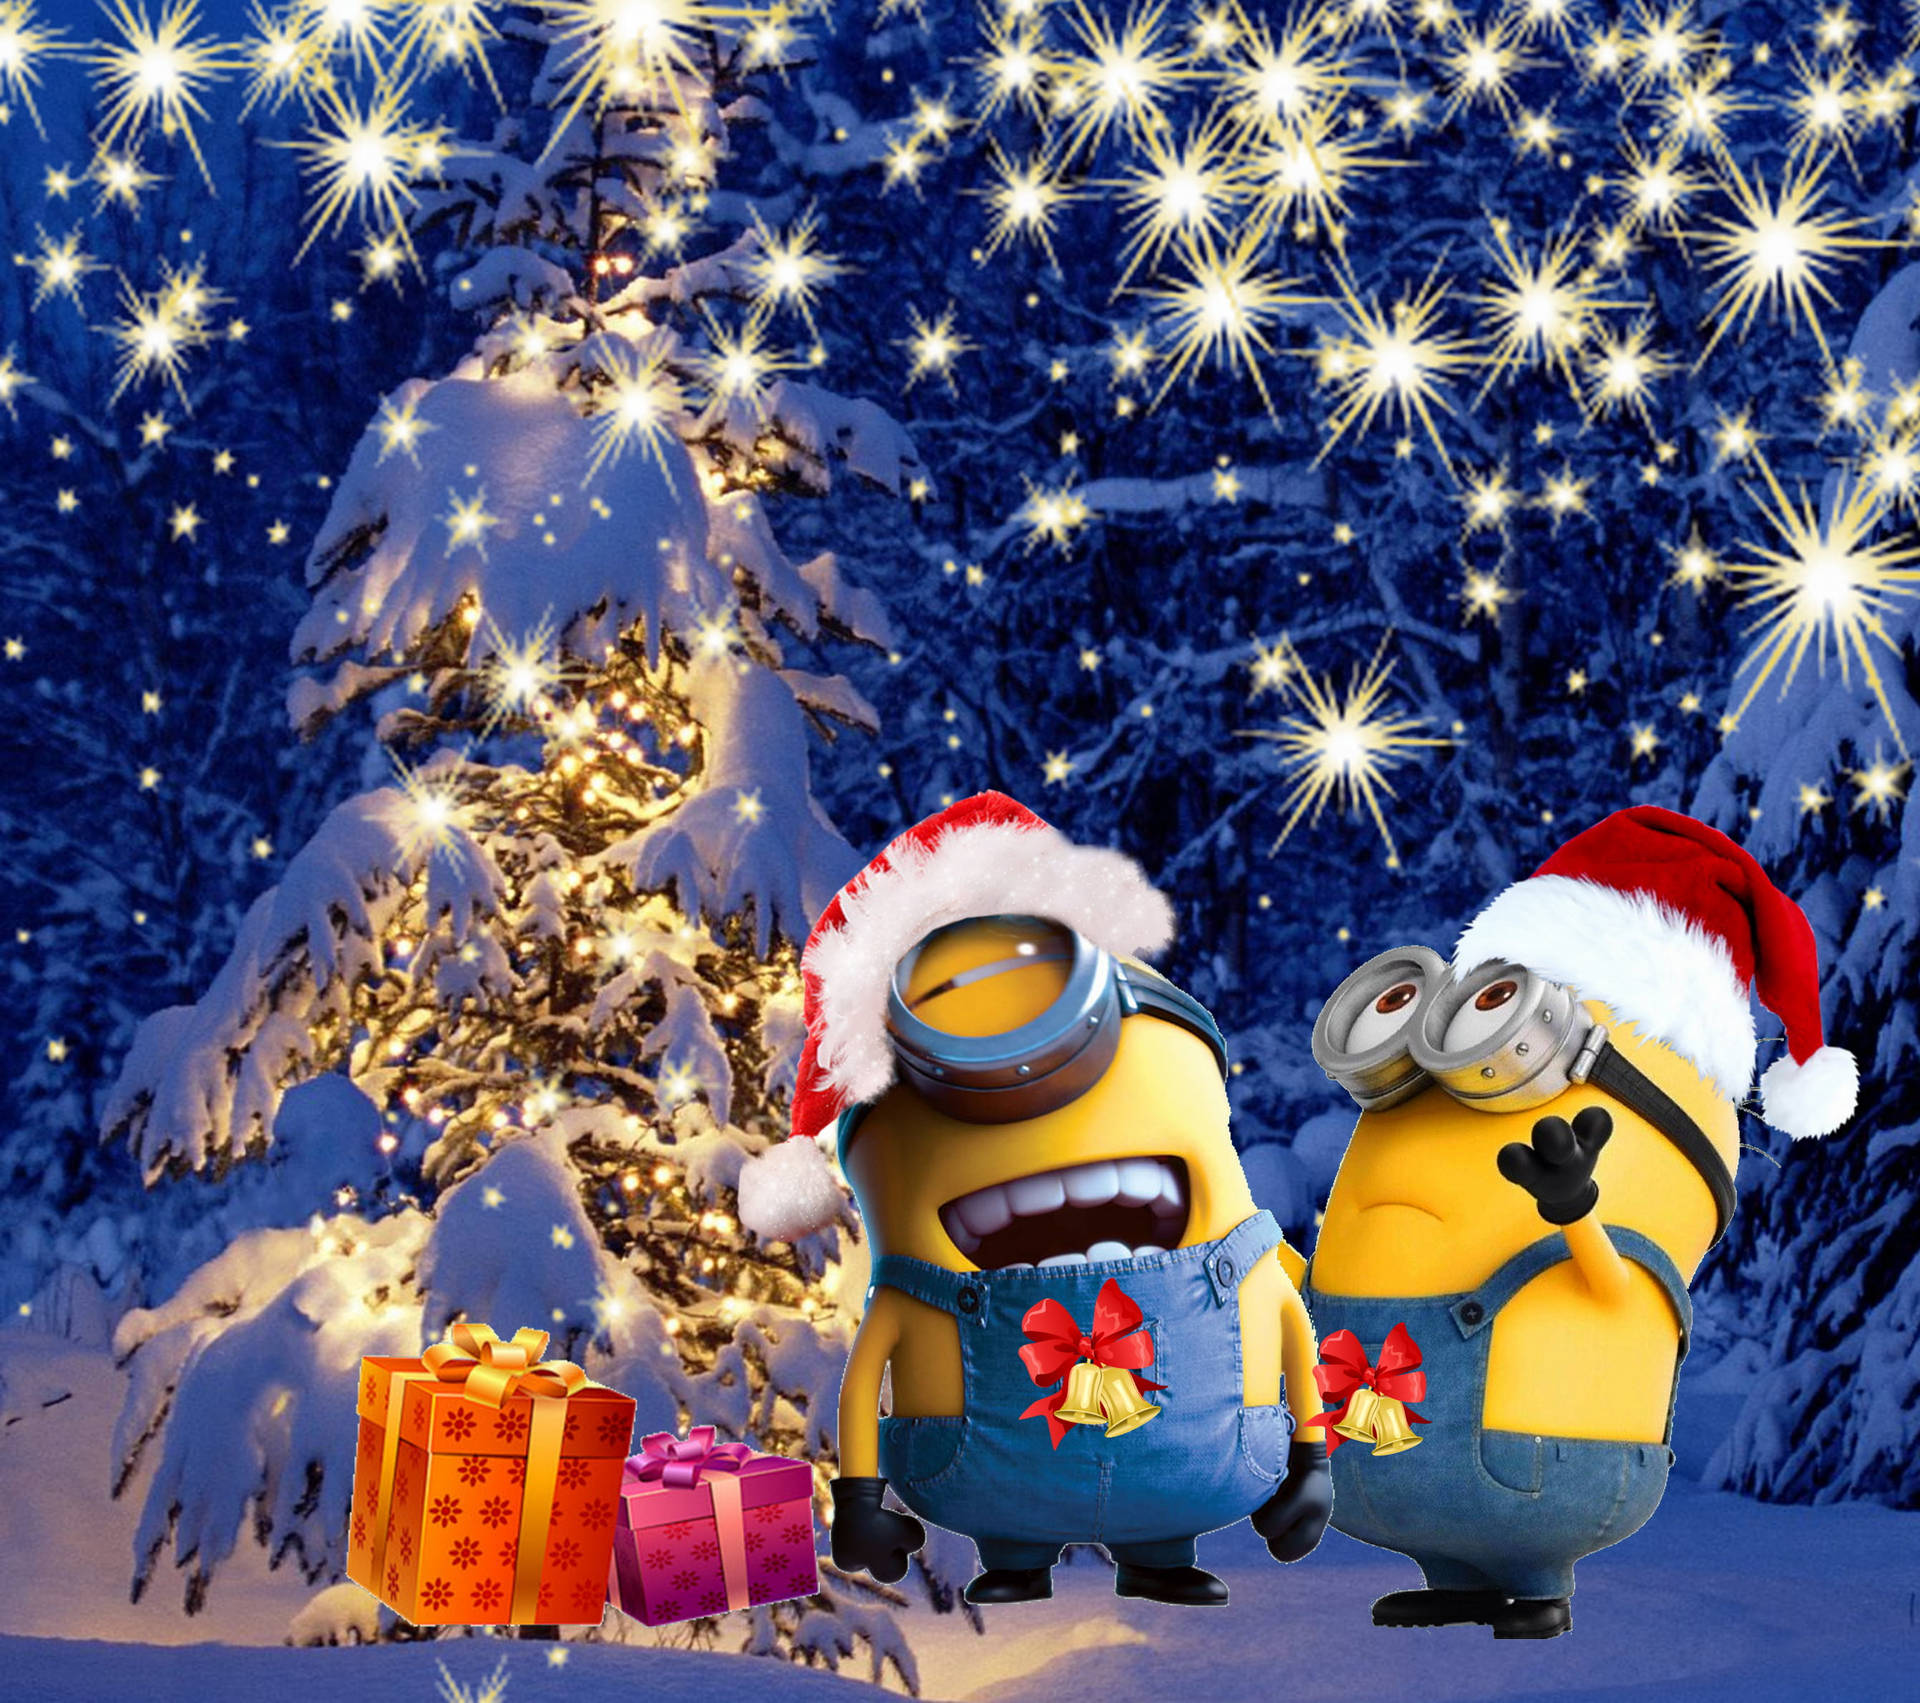 Share 69+ minions christmas wallpaper latest - in.cdgdbentre